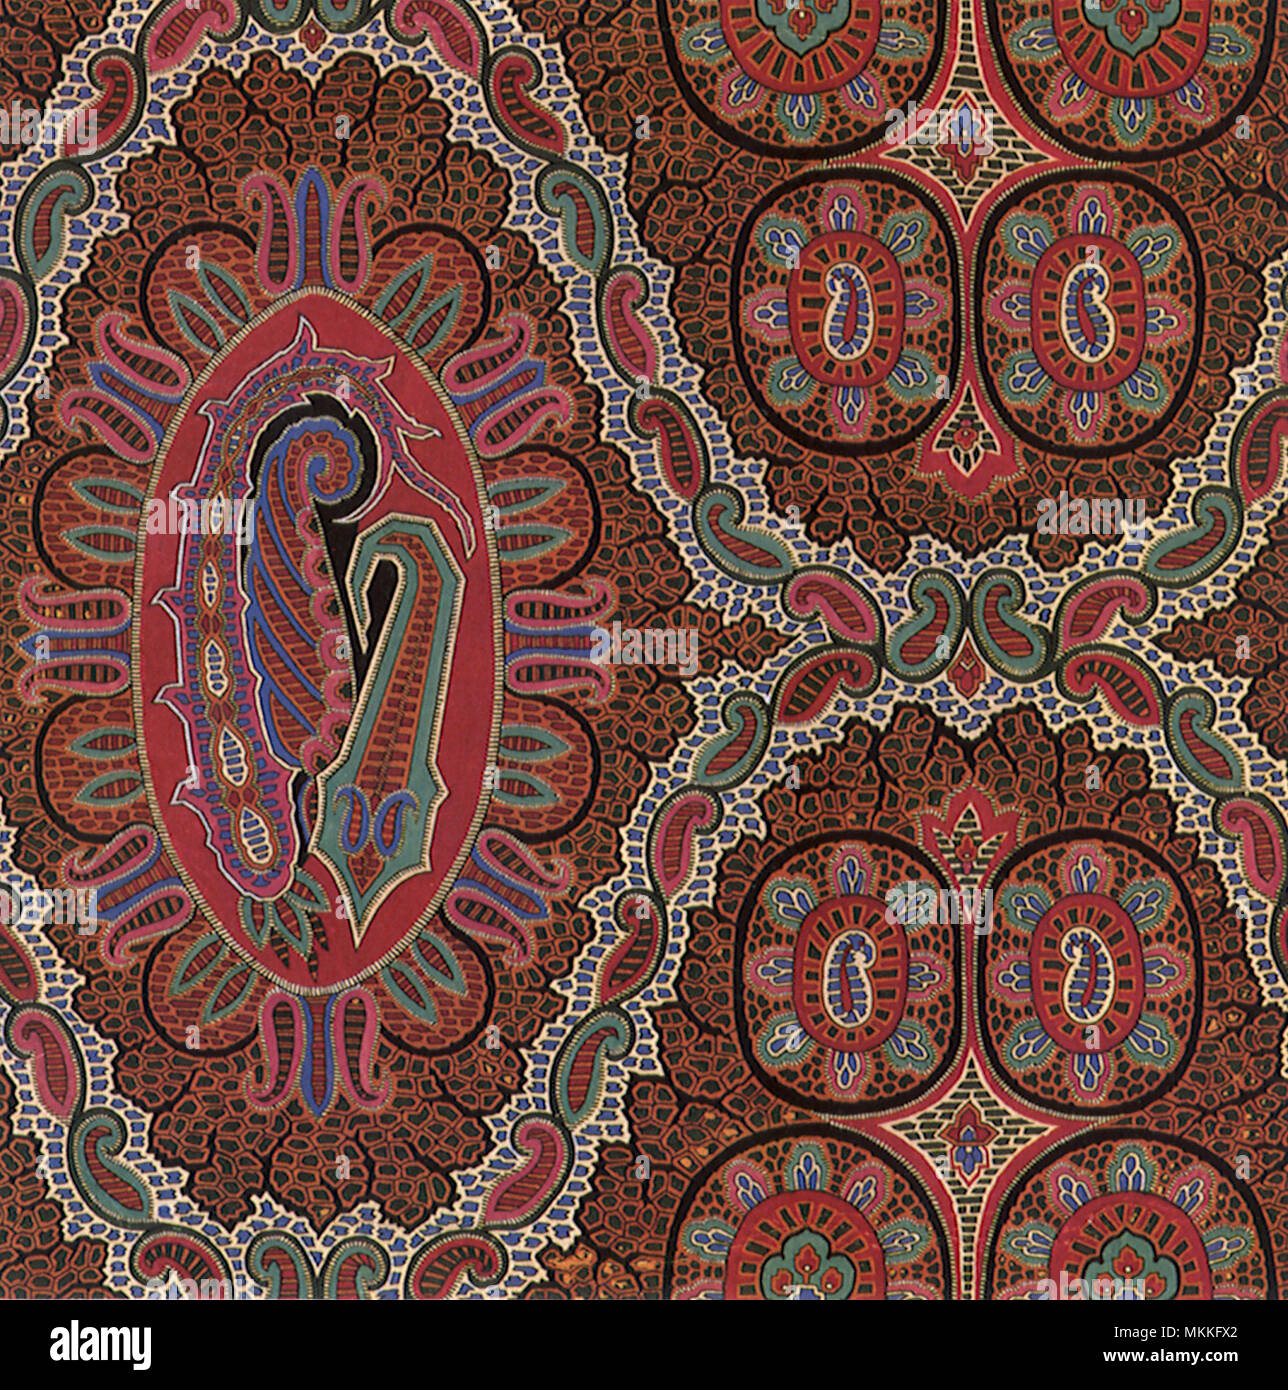 Paisley and Oval Motif Stock Photo